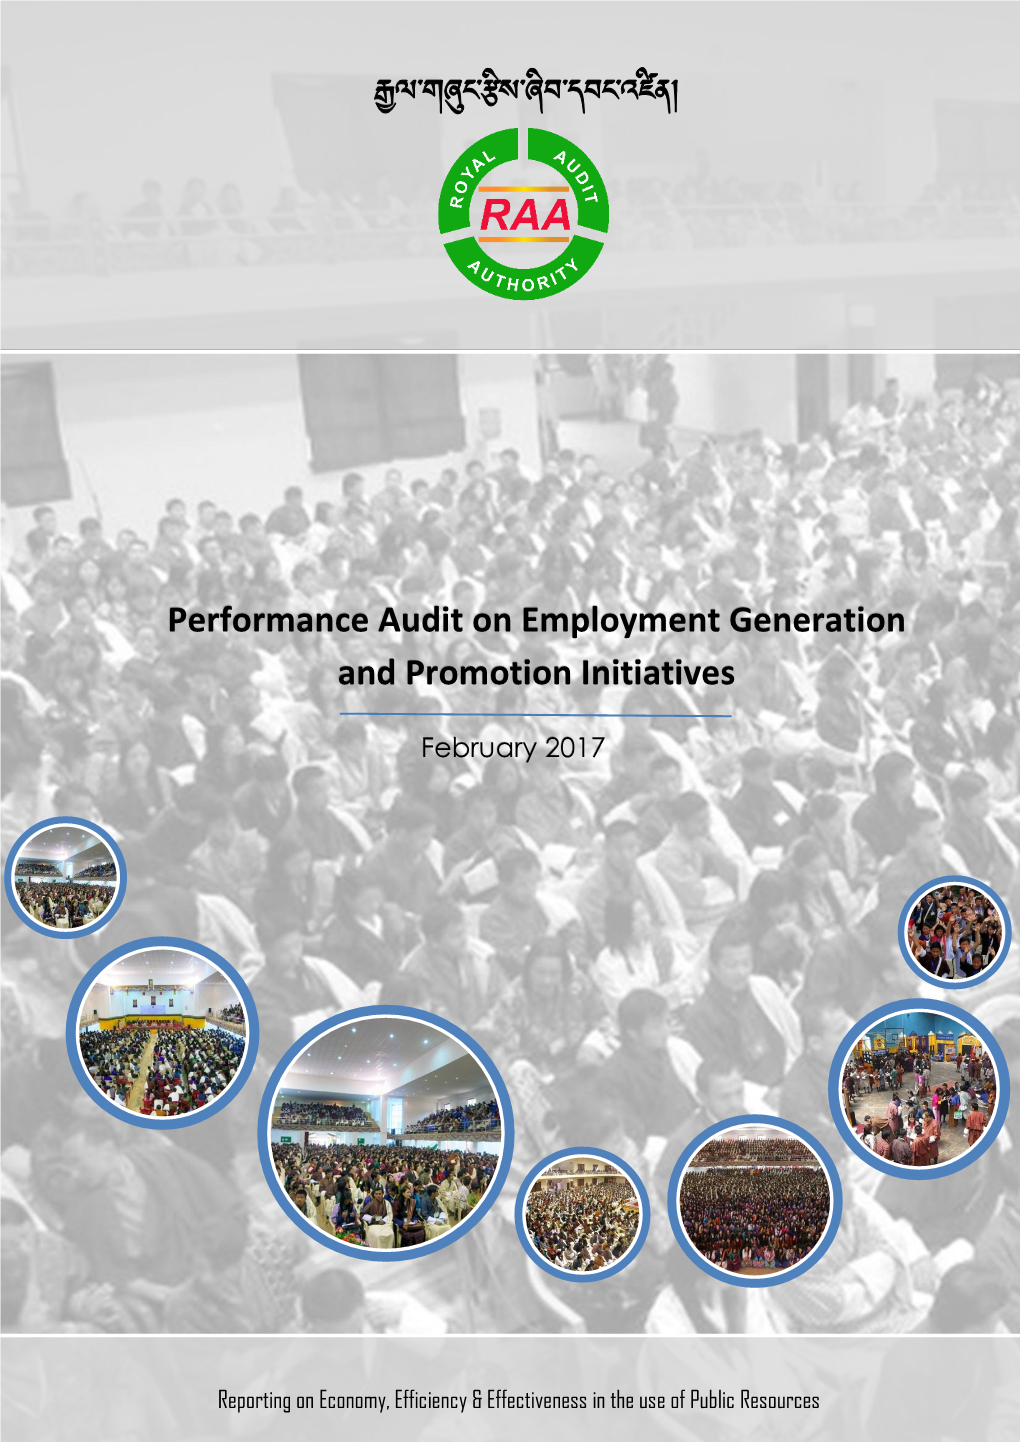 Performance Audit on Employment Generation and Promotion Initiatives